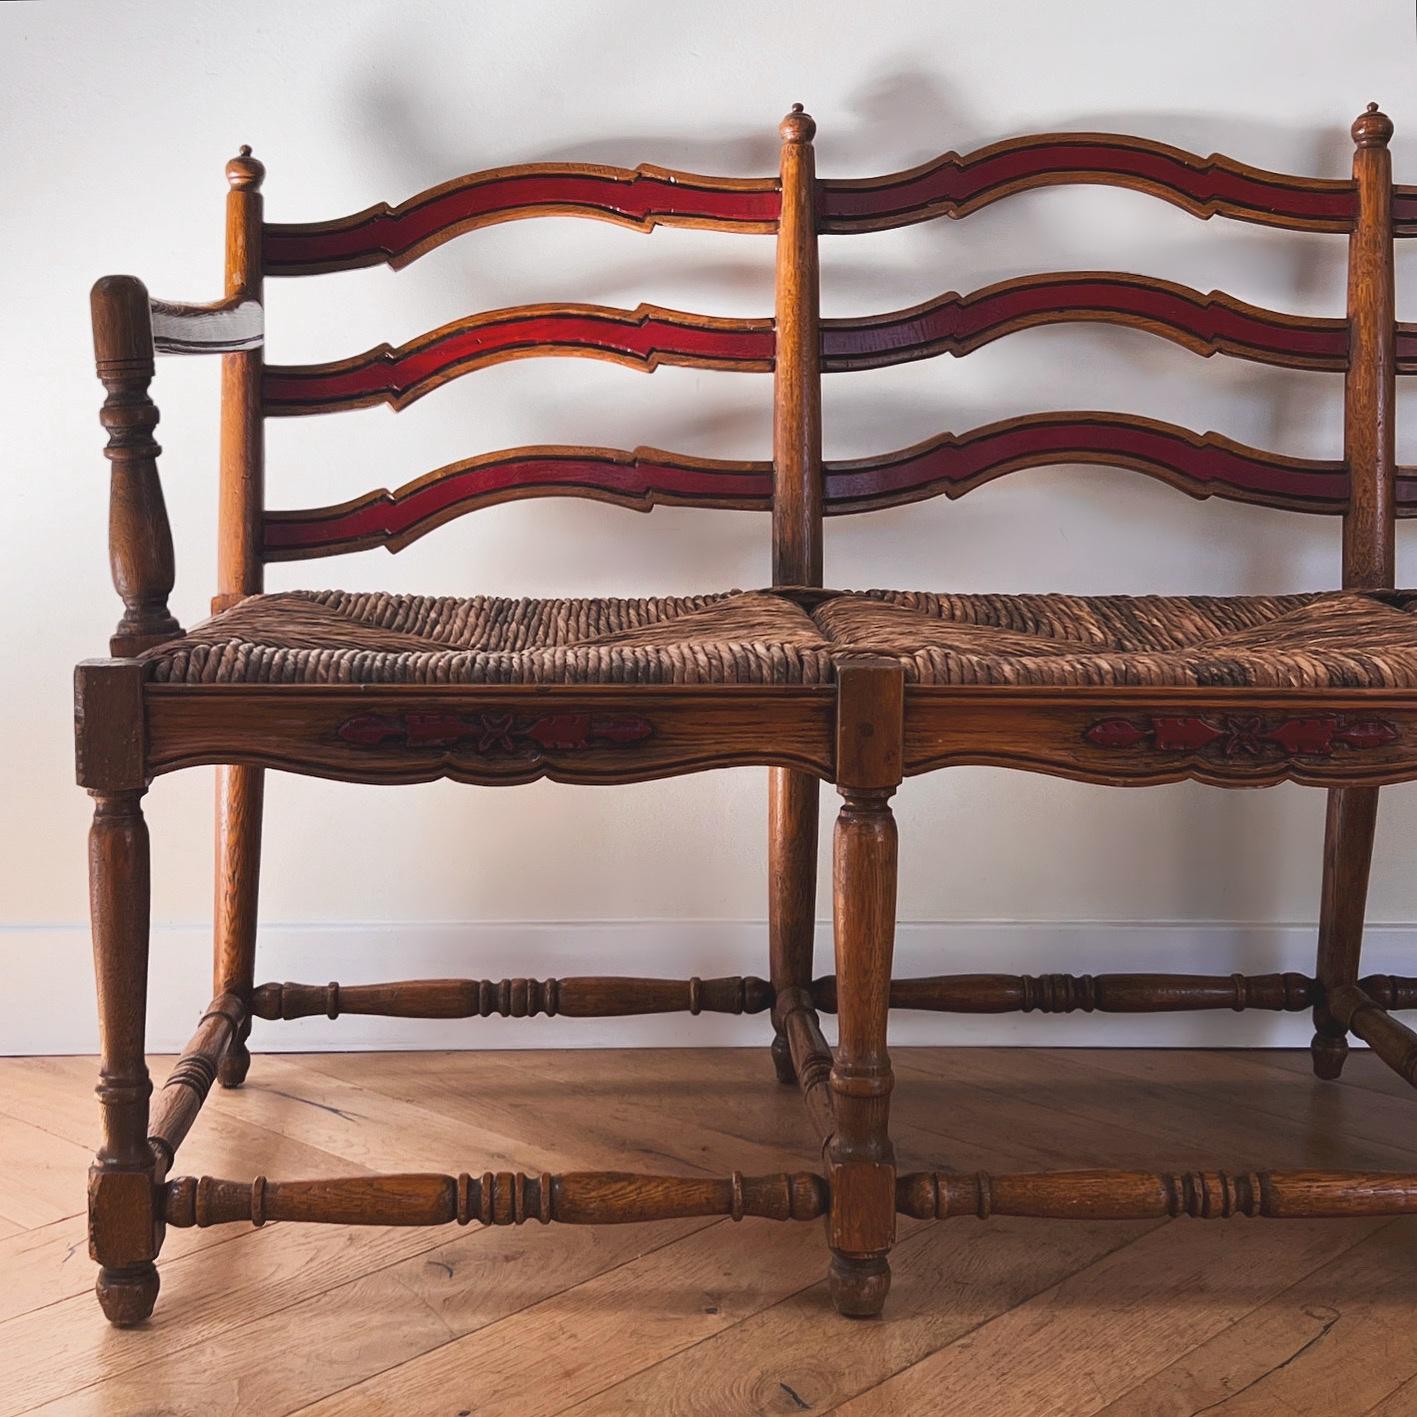 A wicker rush and oak wood ladder back Provençal painted bench, 20th century. Probably circa early 1950s. Featuring spindle and painted cerise detail. Fabulous indoors or as an outdoor patio bench - this piece would be lovely a bit weathered. For